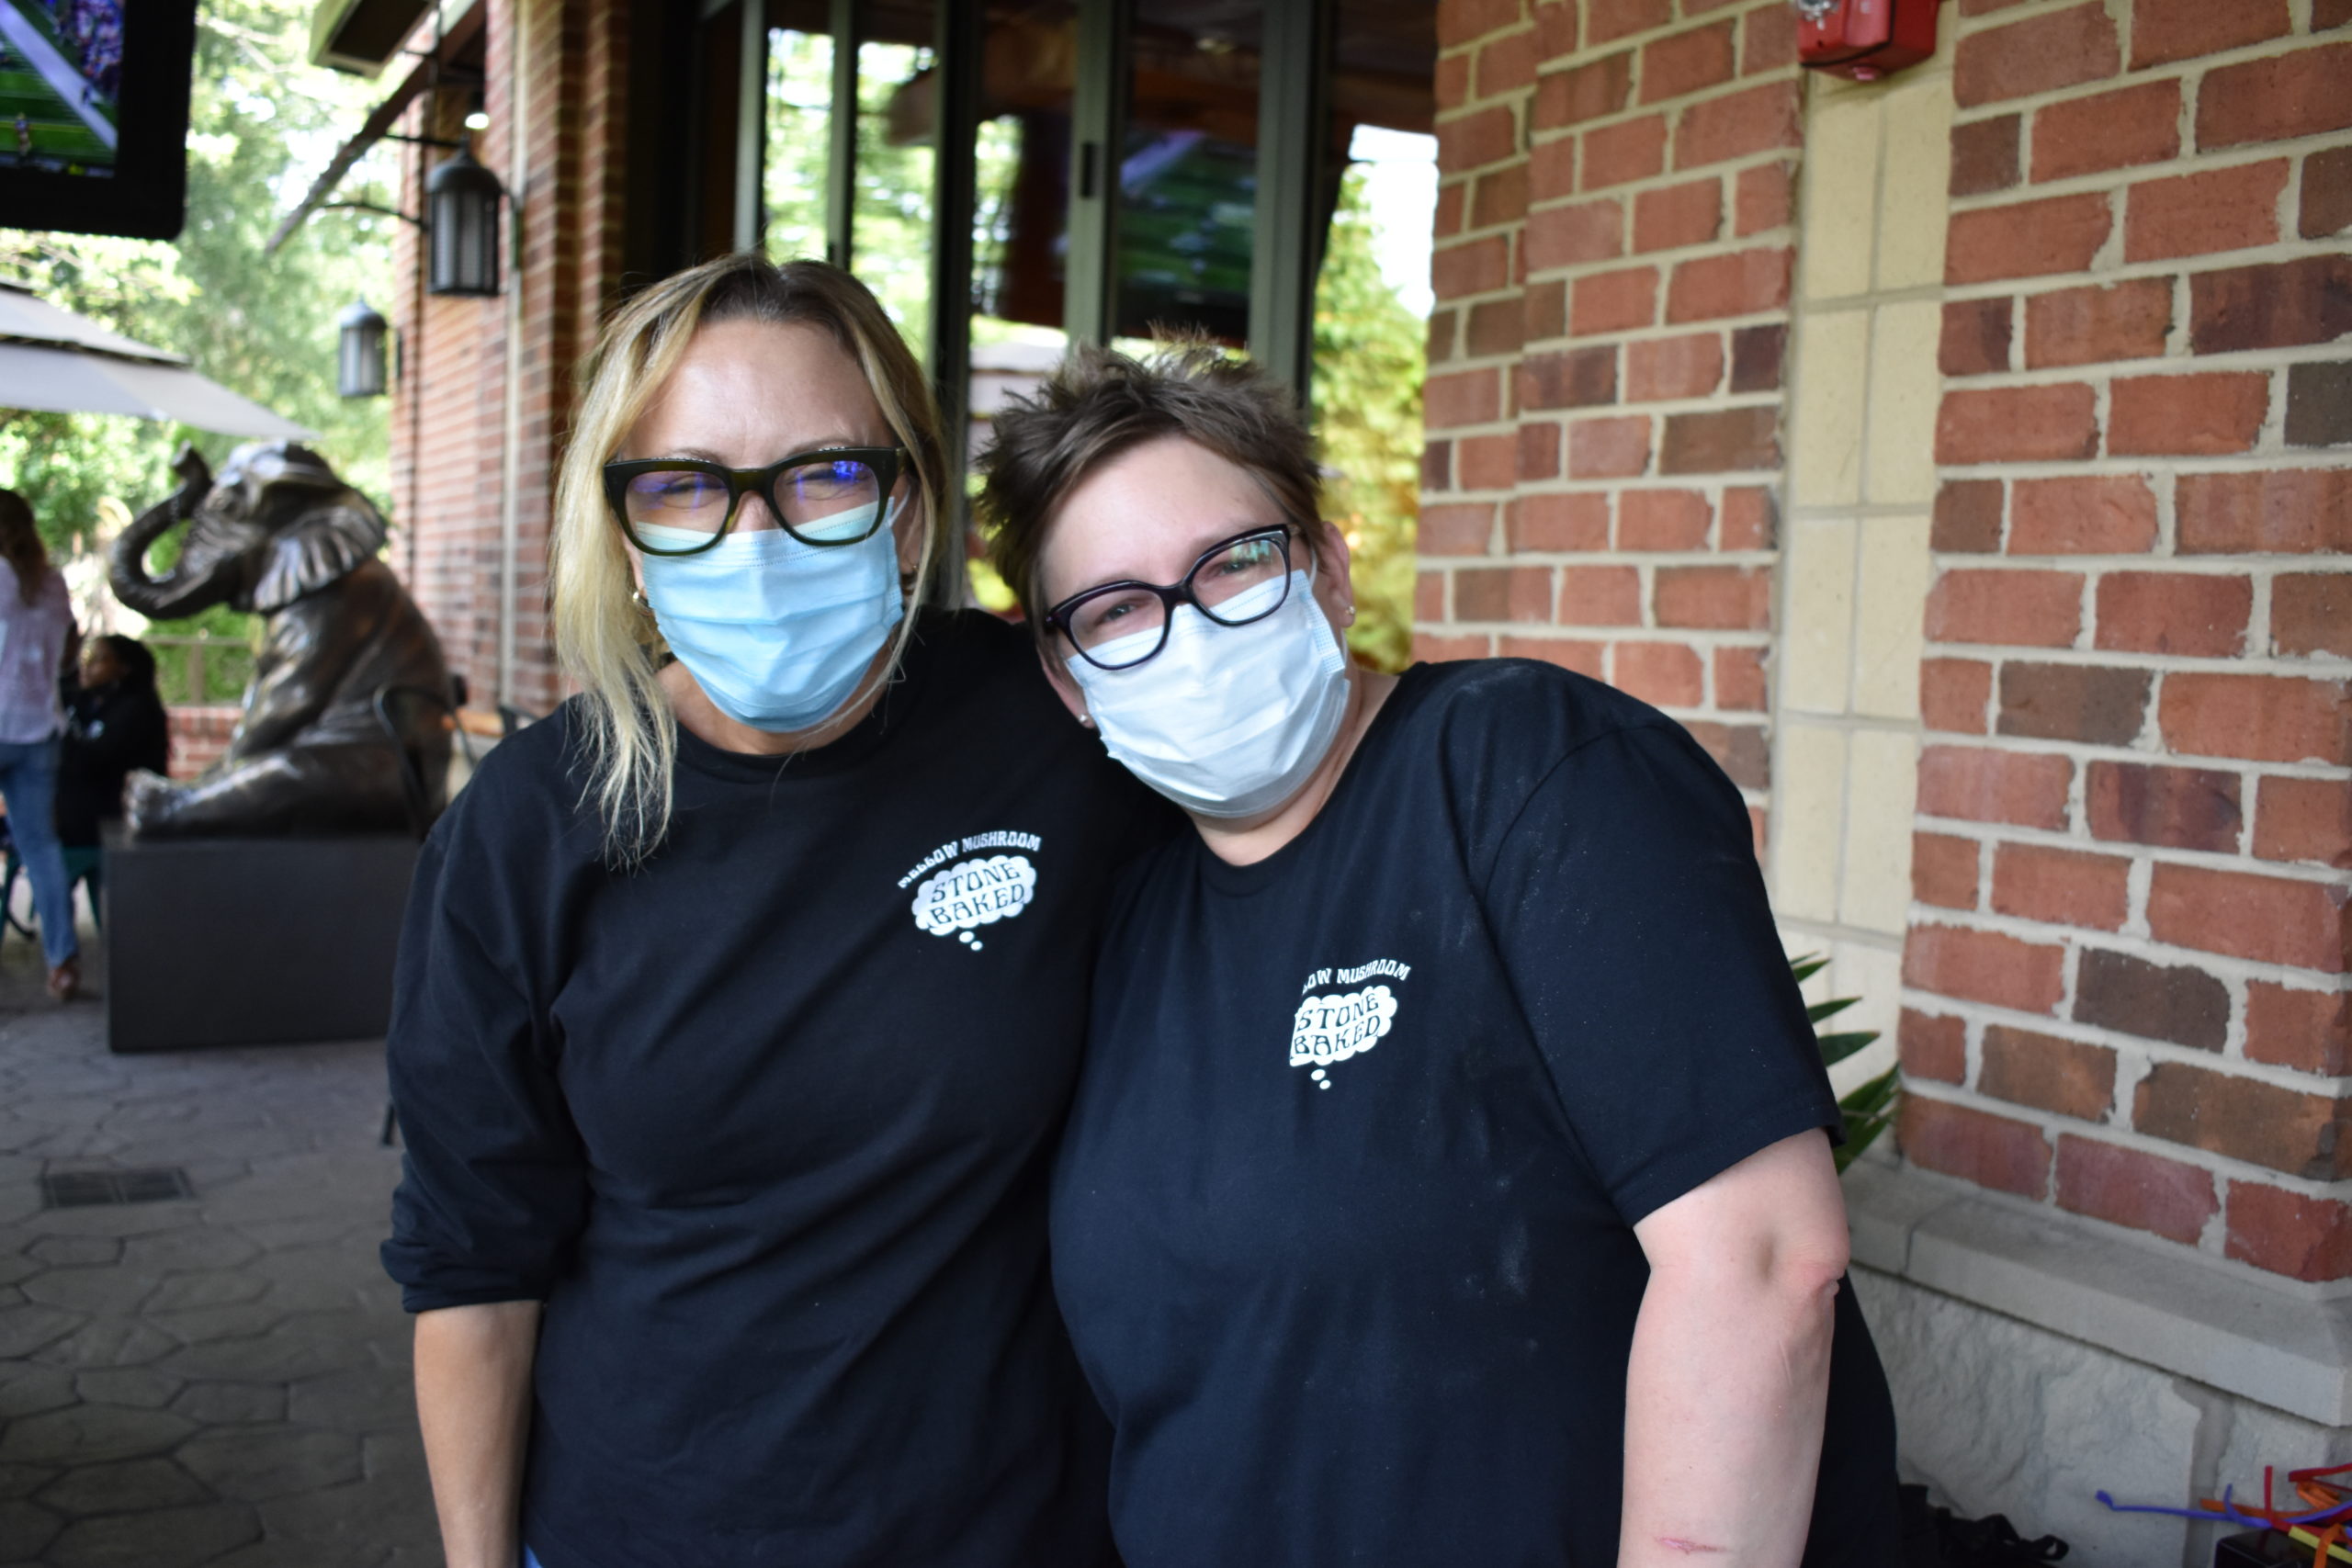 Image two people wearing face masks and shirts for Mellow Mushroom